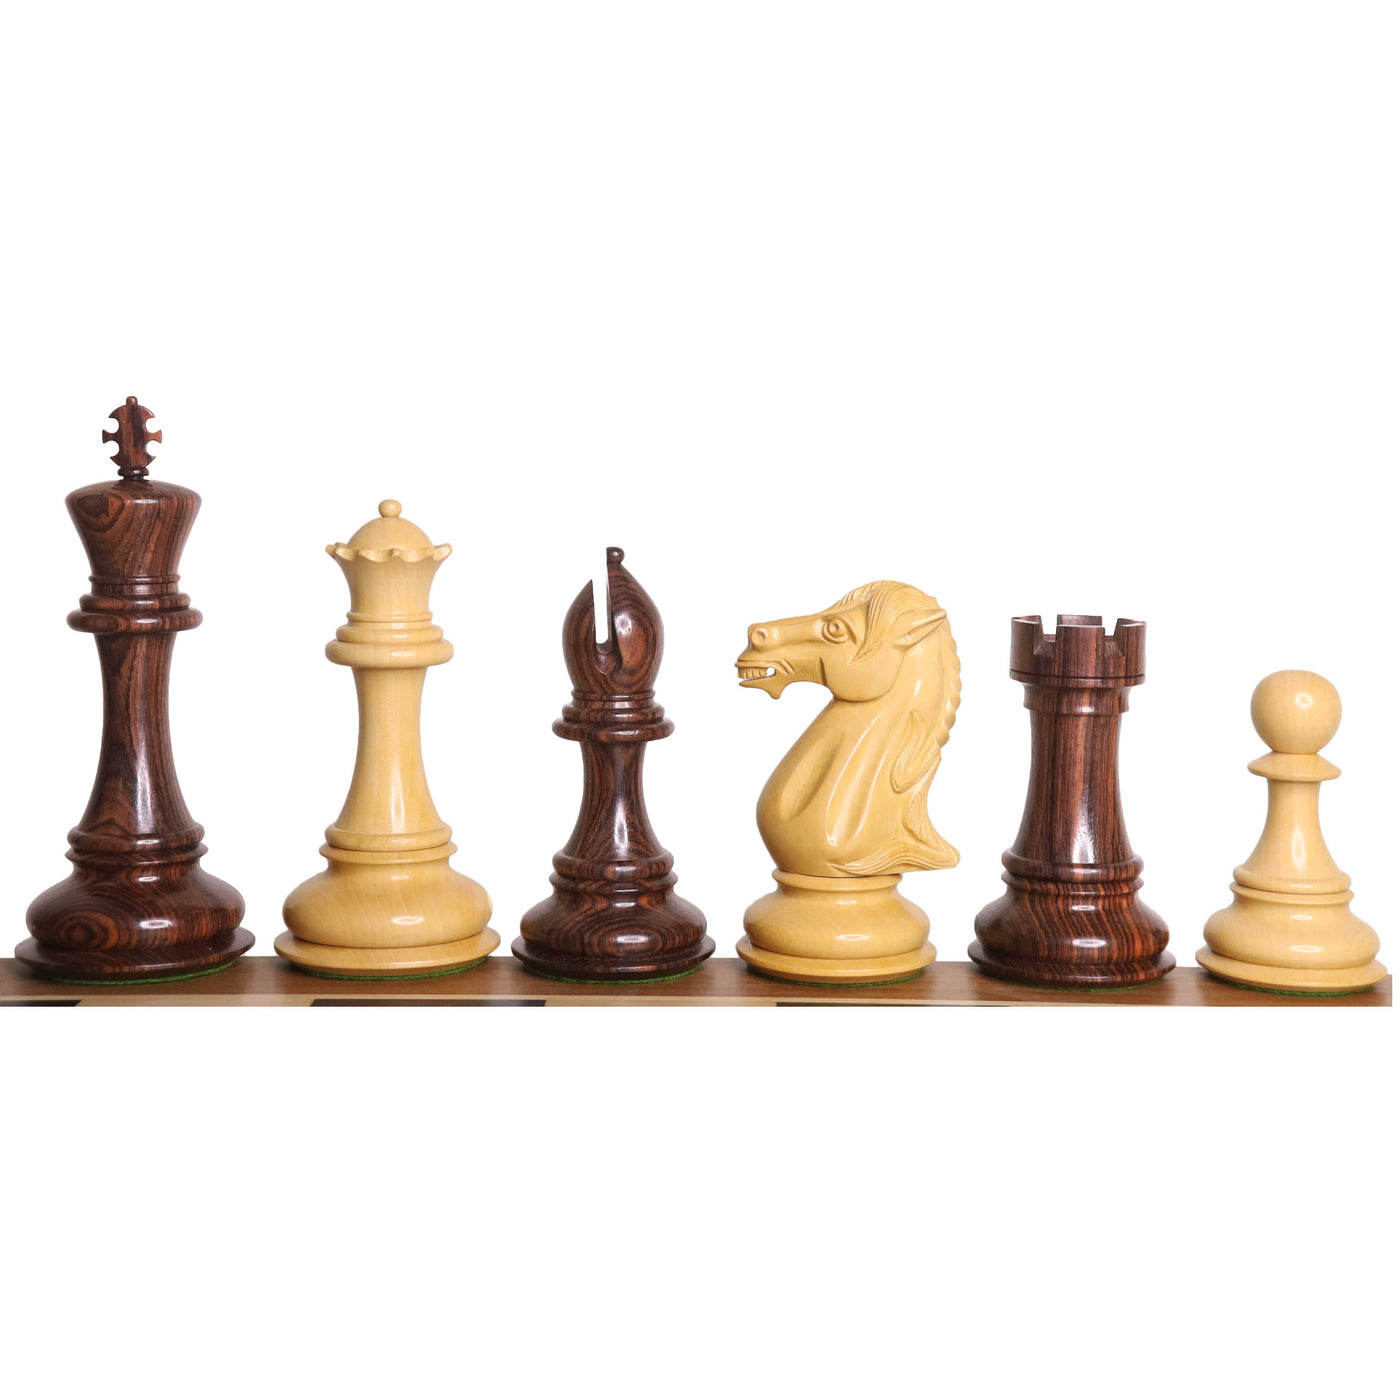 6.1" Mammoth Luxury Staunton Chess Set - Chess Pieces Only - Rosewood - Triple Weight